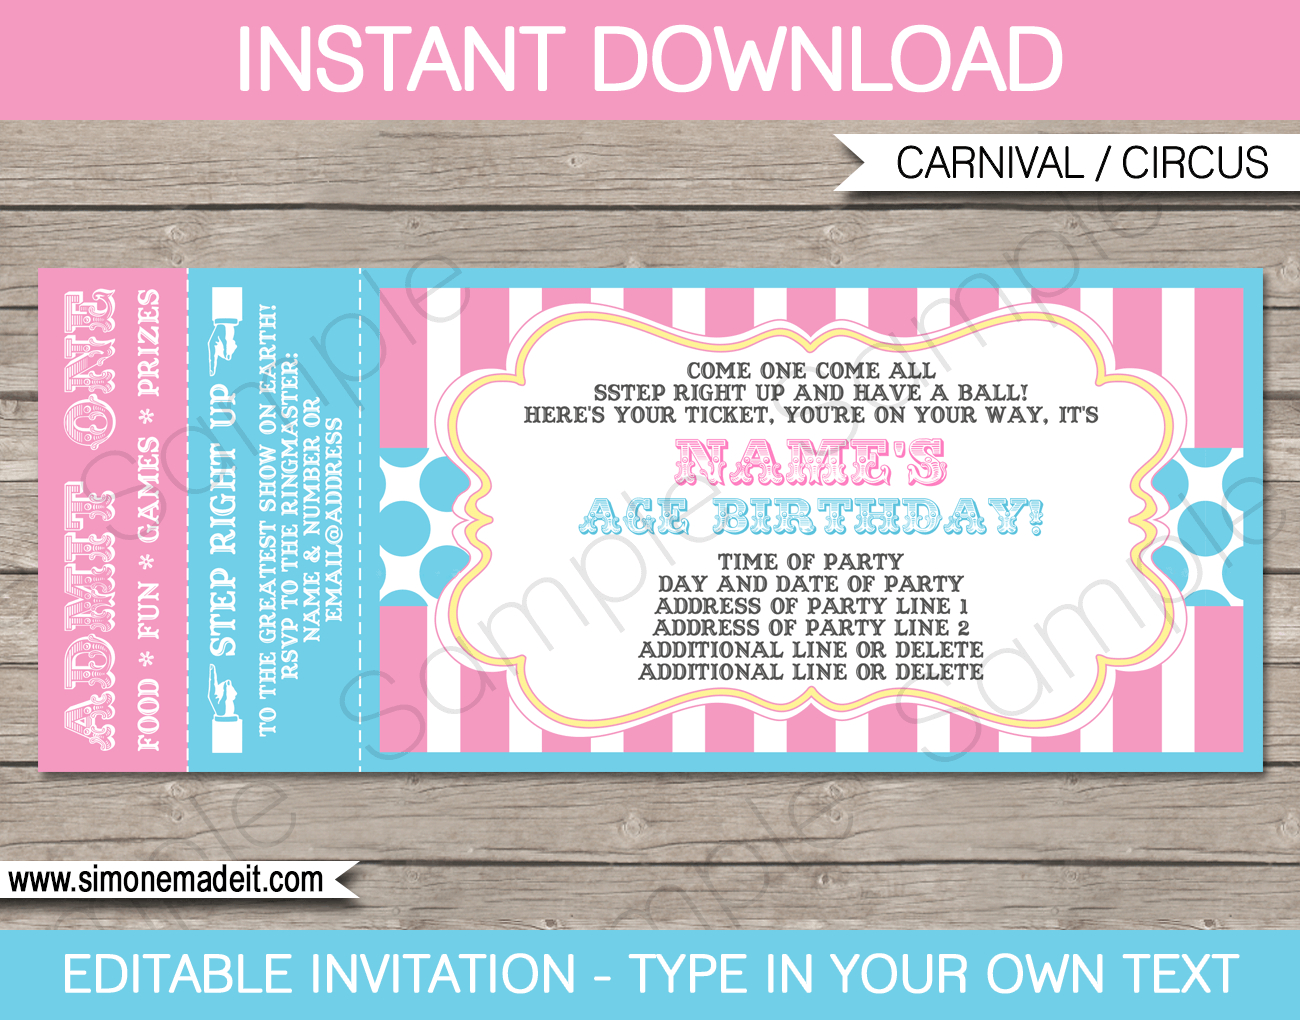 Carnival Ticket Invitations Template Carnival Circus Pink Aqua within measurements 1300 X 1020